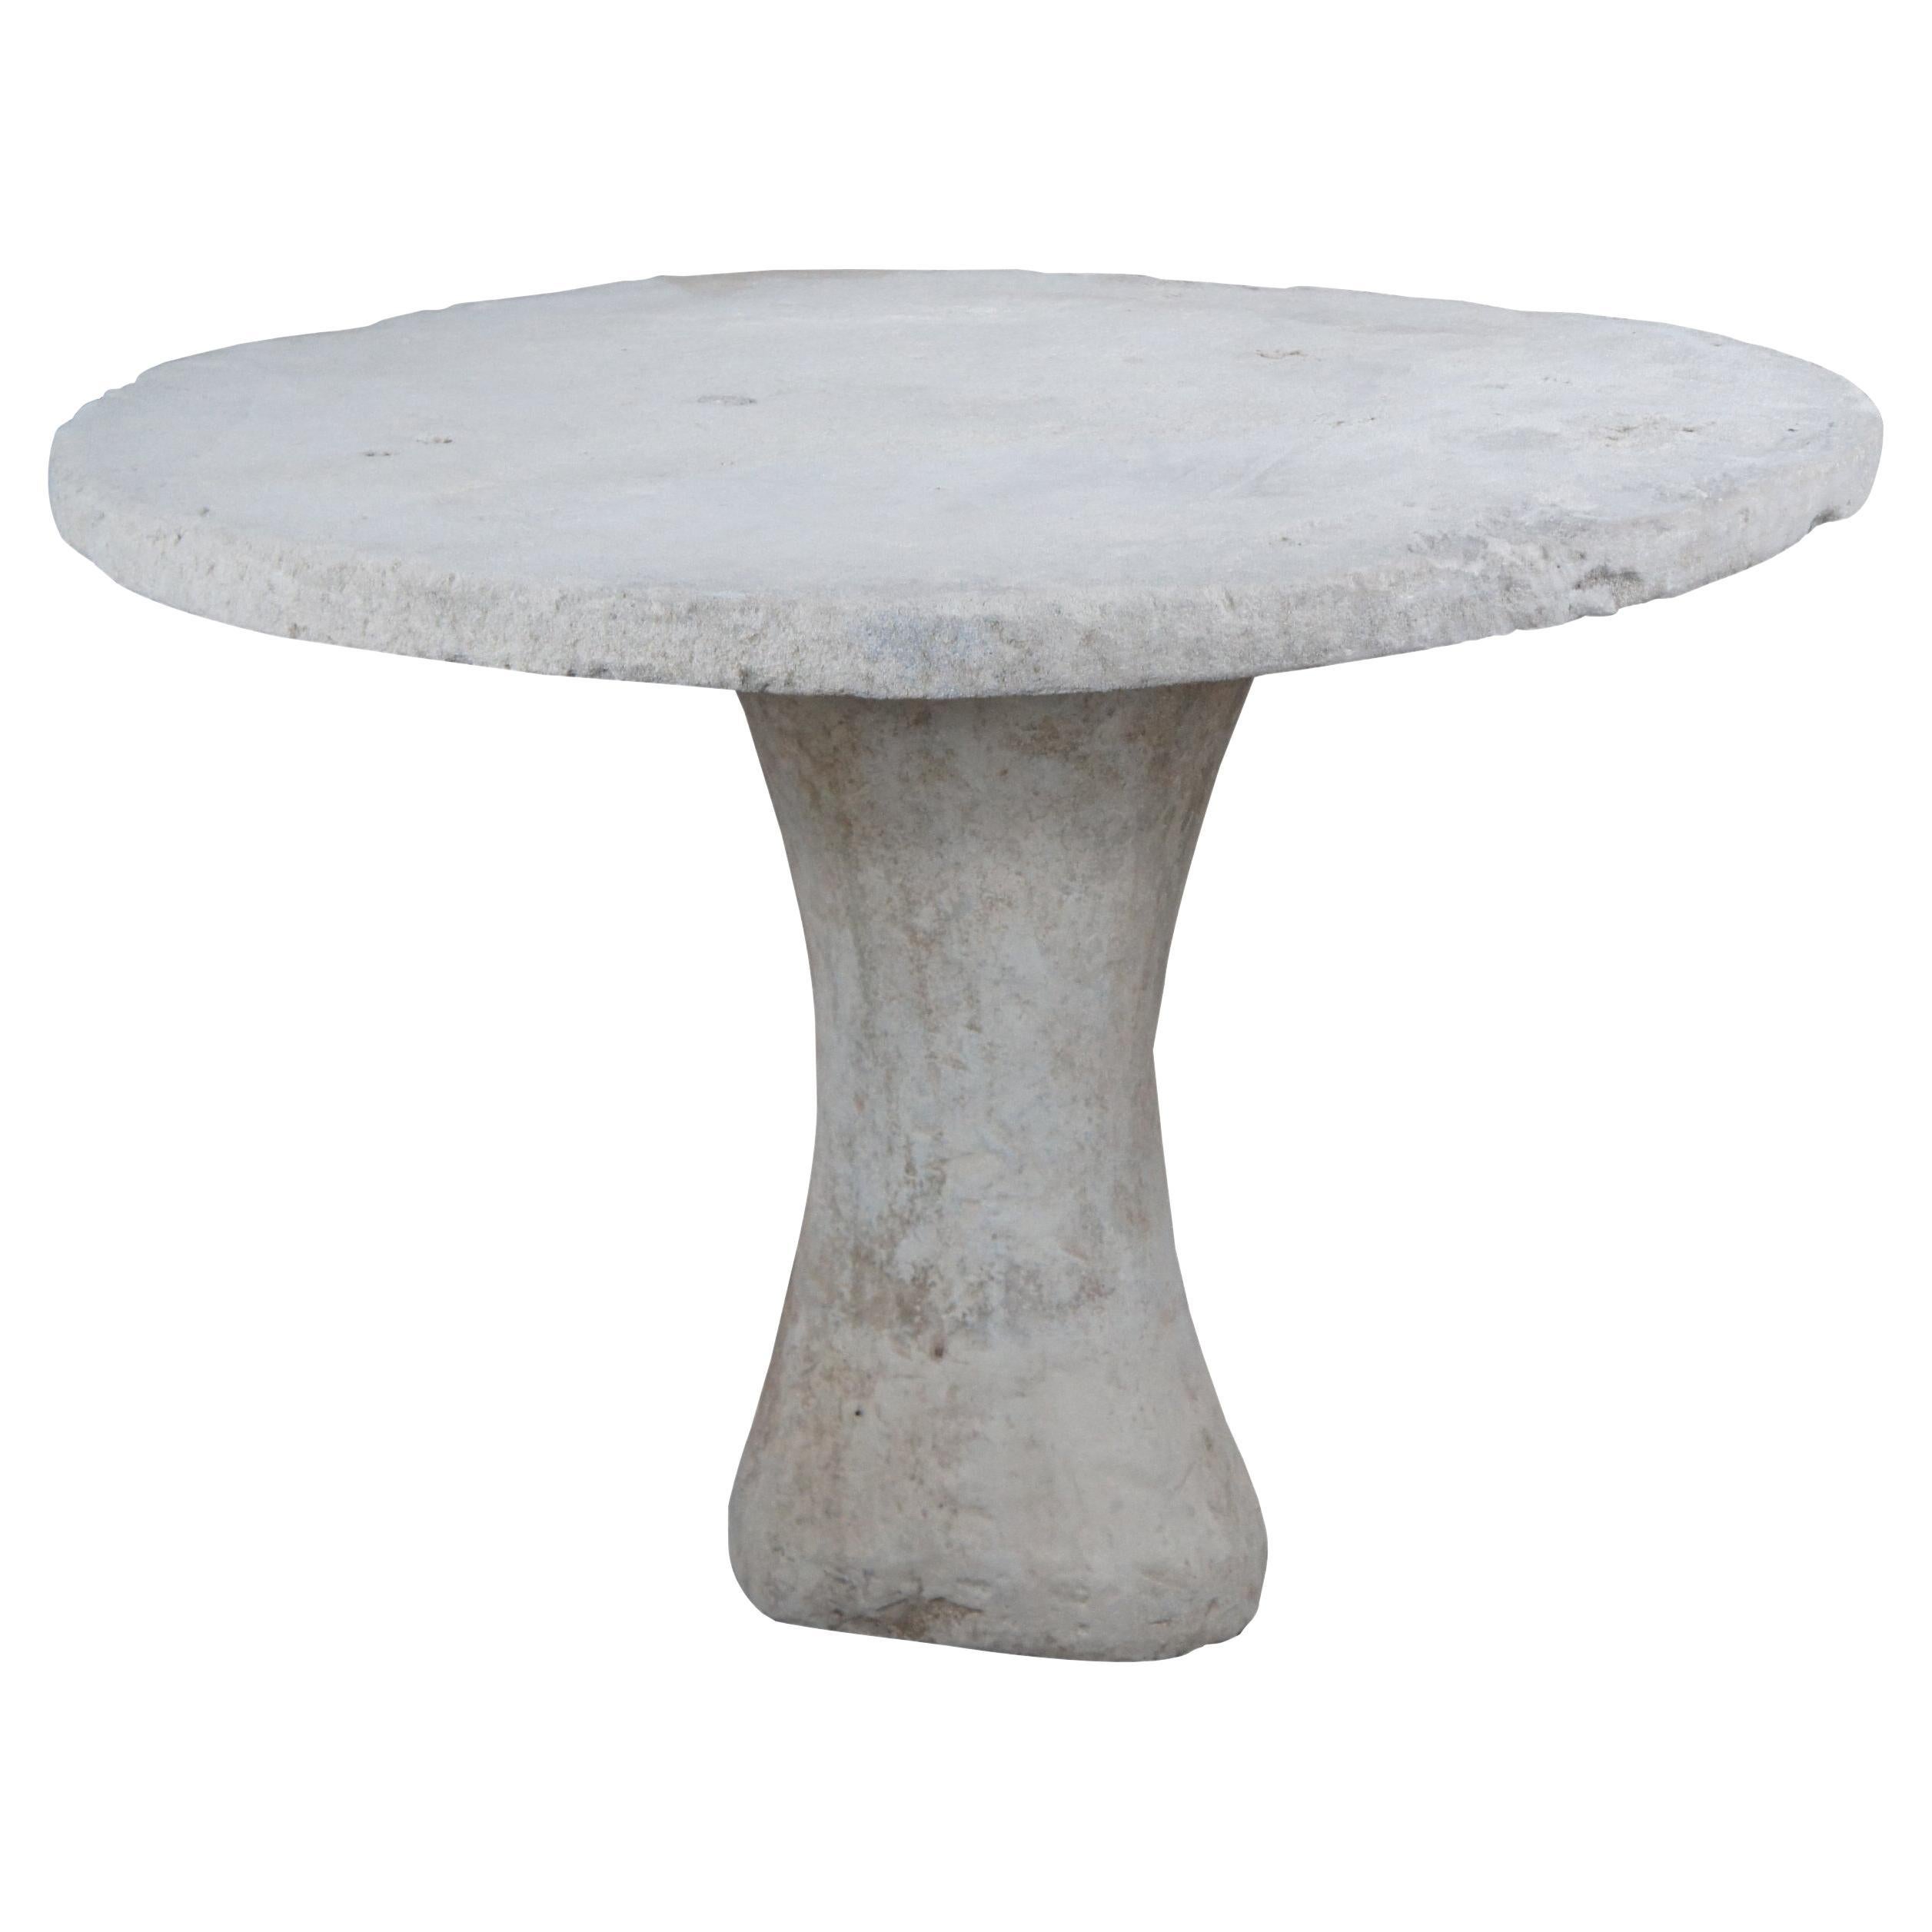 Vintage Primitive Round Porous Stone Breakfast Dining Patio Center Entry Table 4